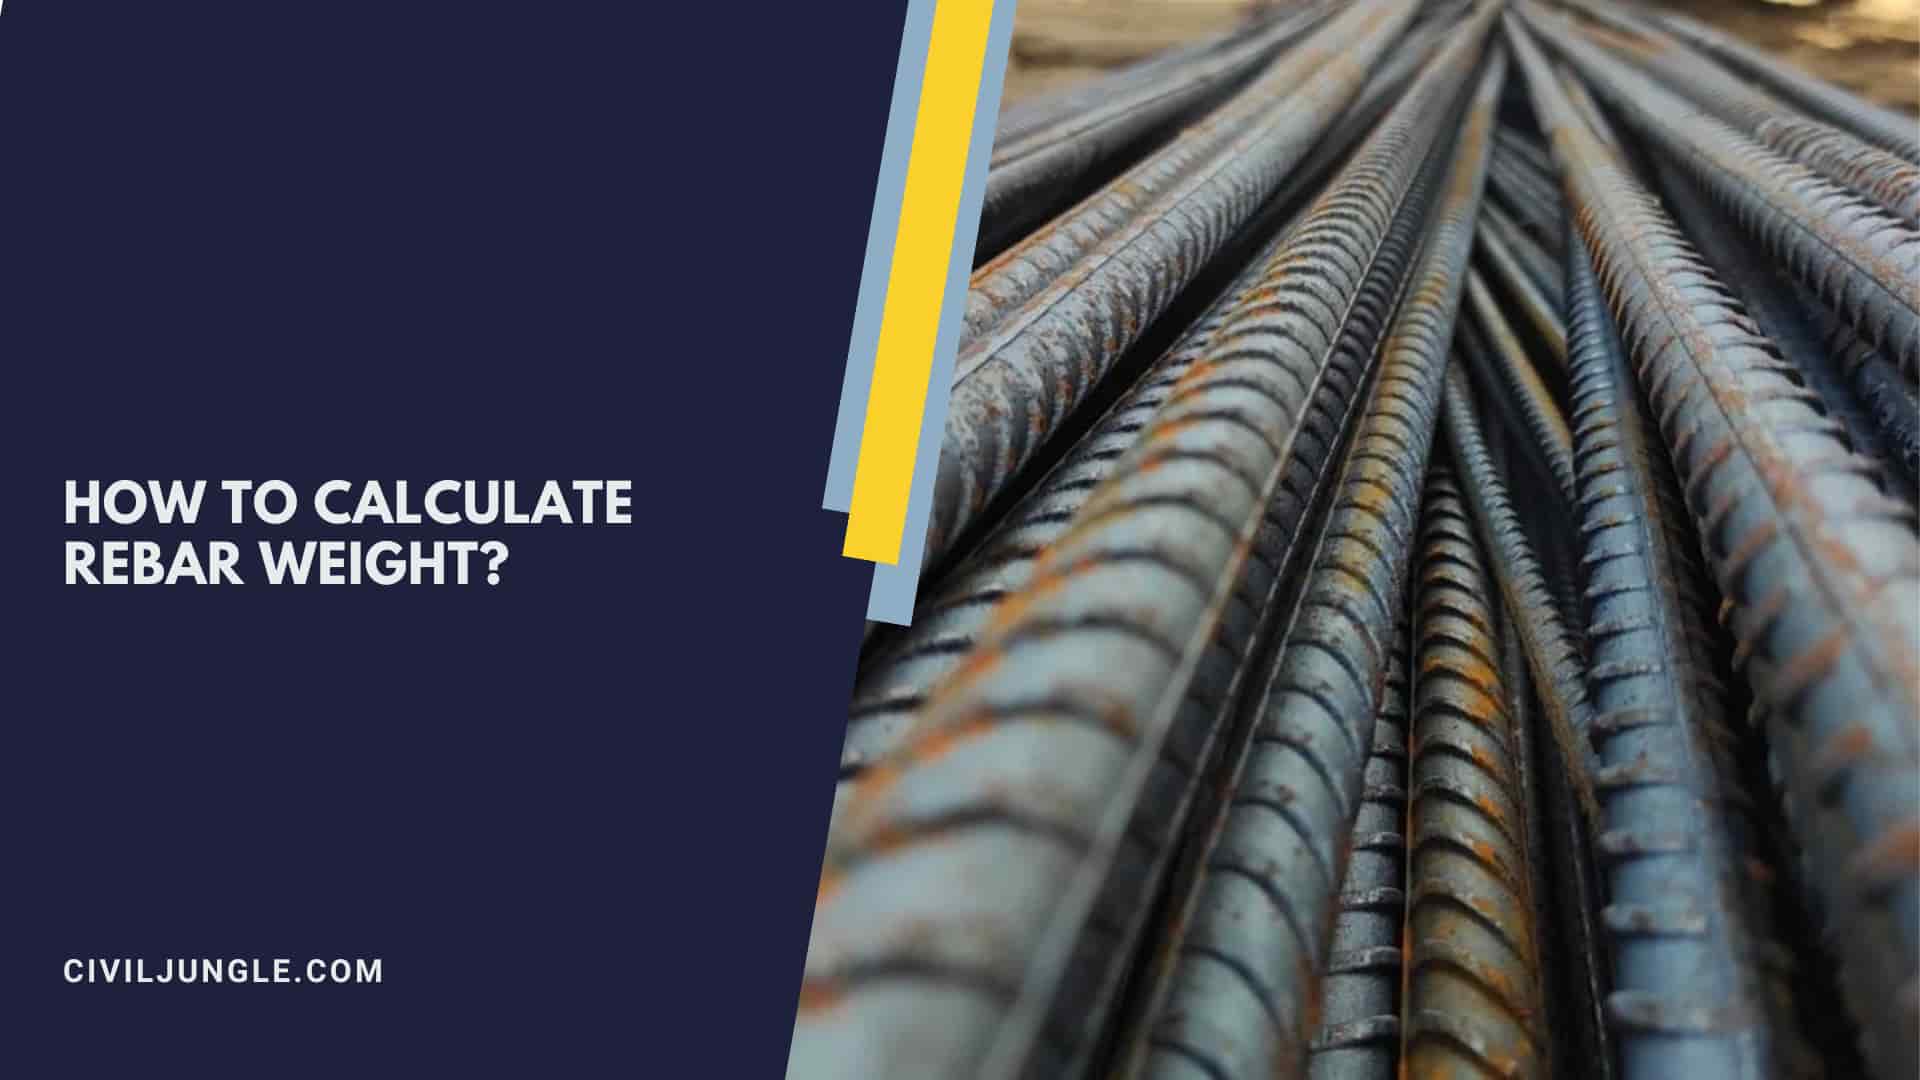 How to Calculate Rebar Weight?